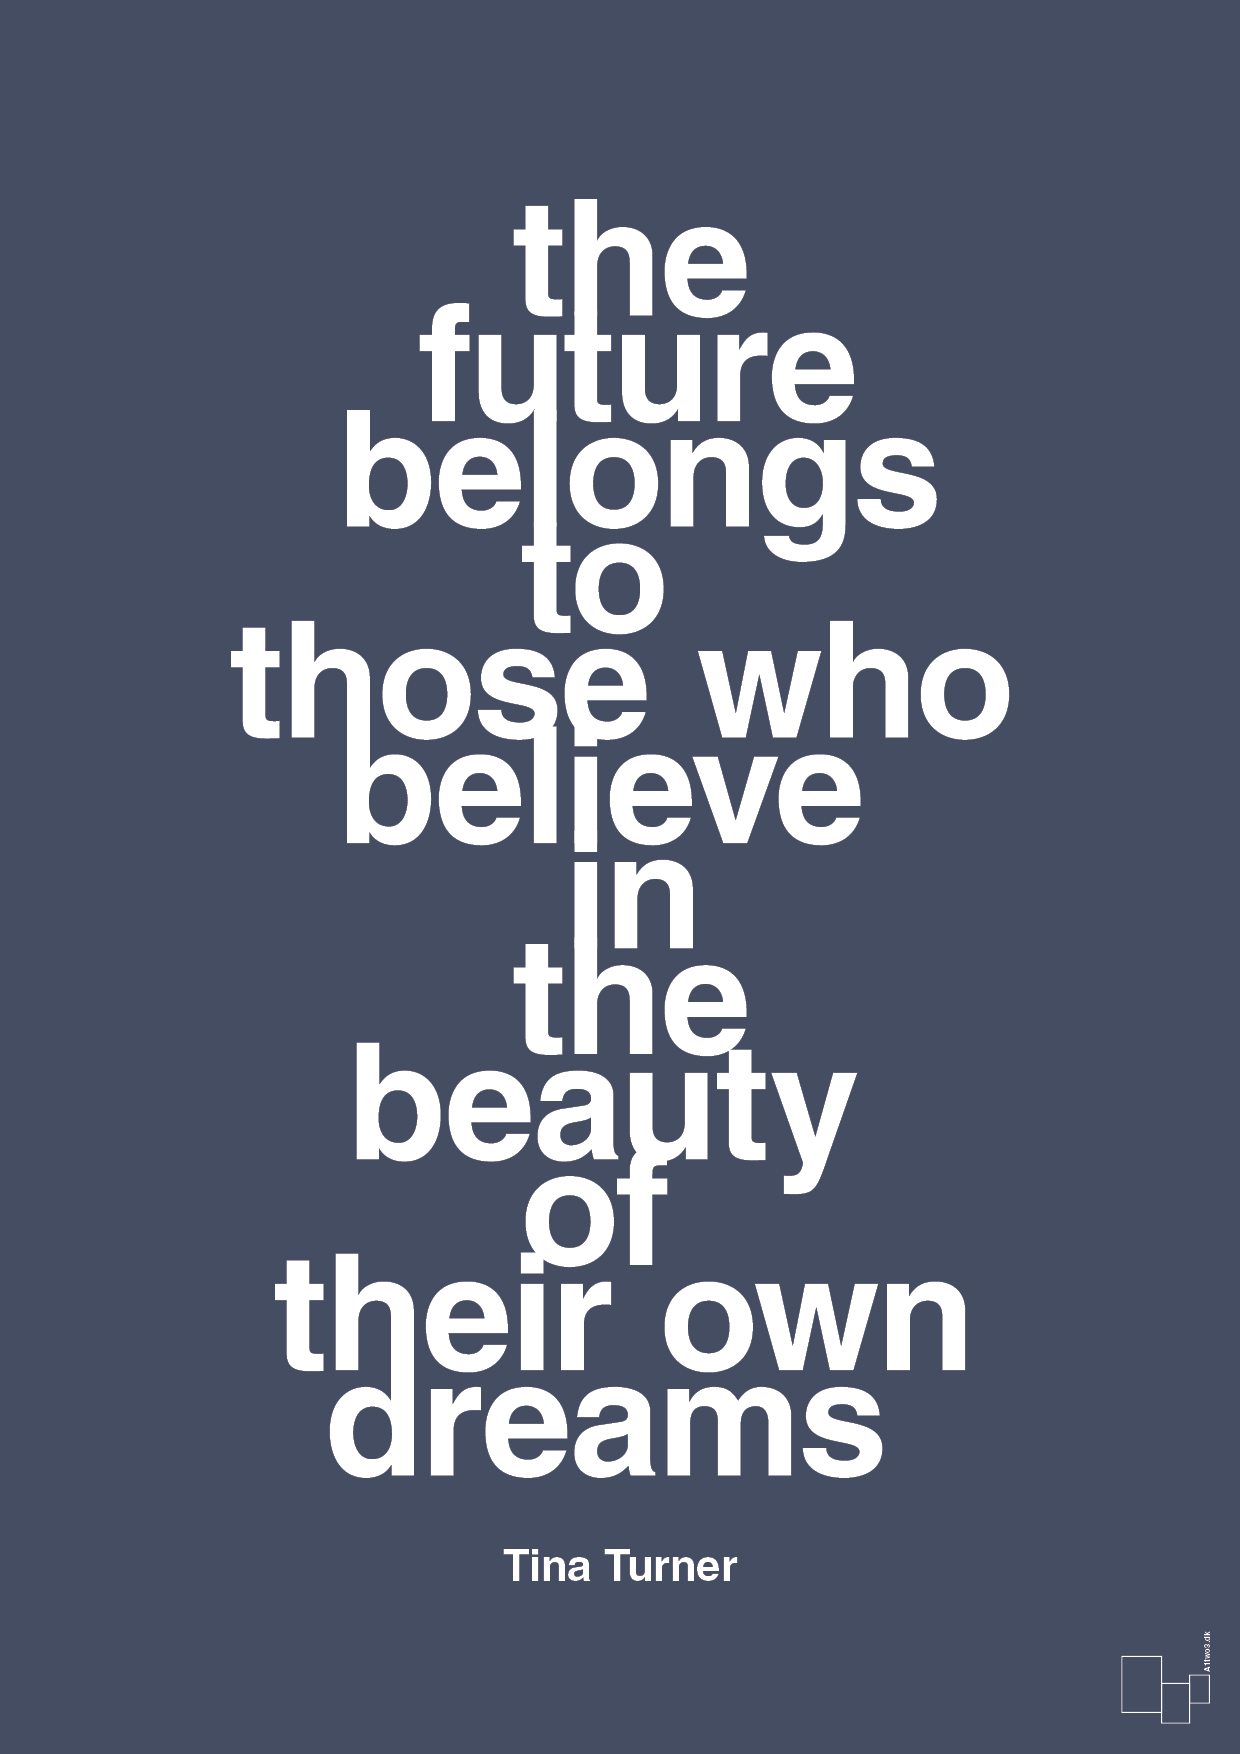 the future belongs to those who believe in the beauty of their own dreams - Plakat med Citater i Petrol